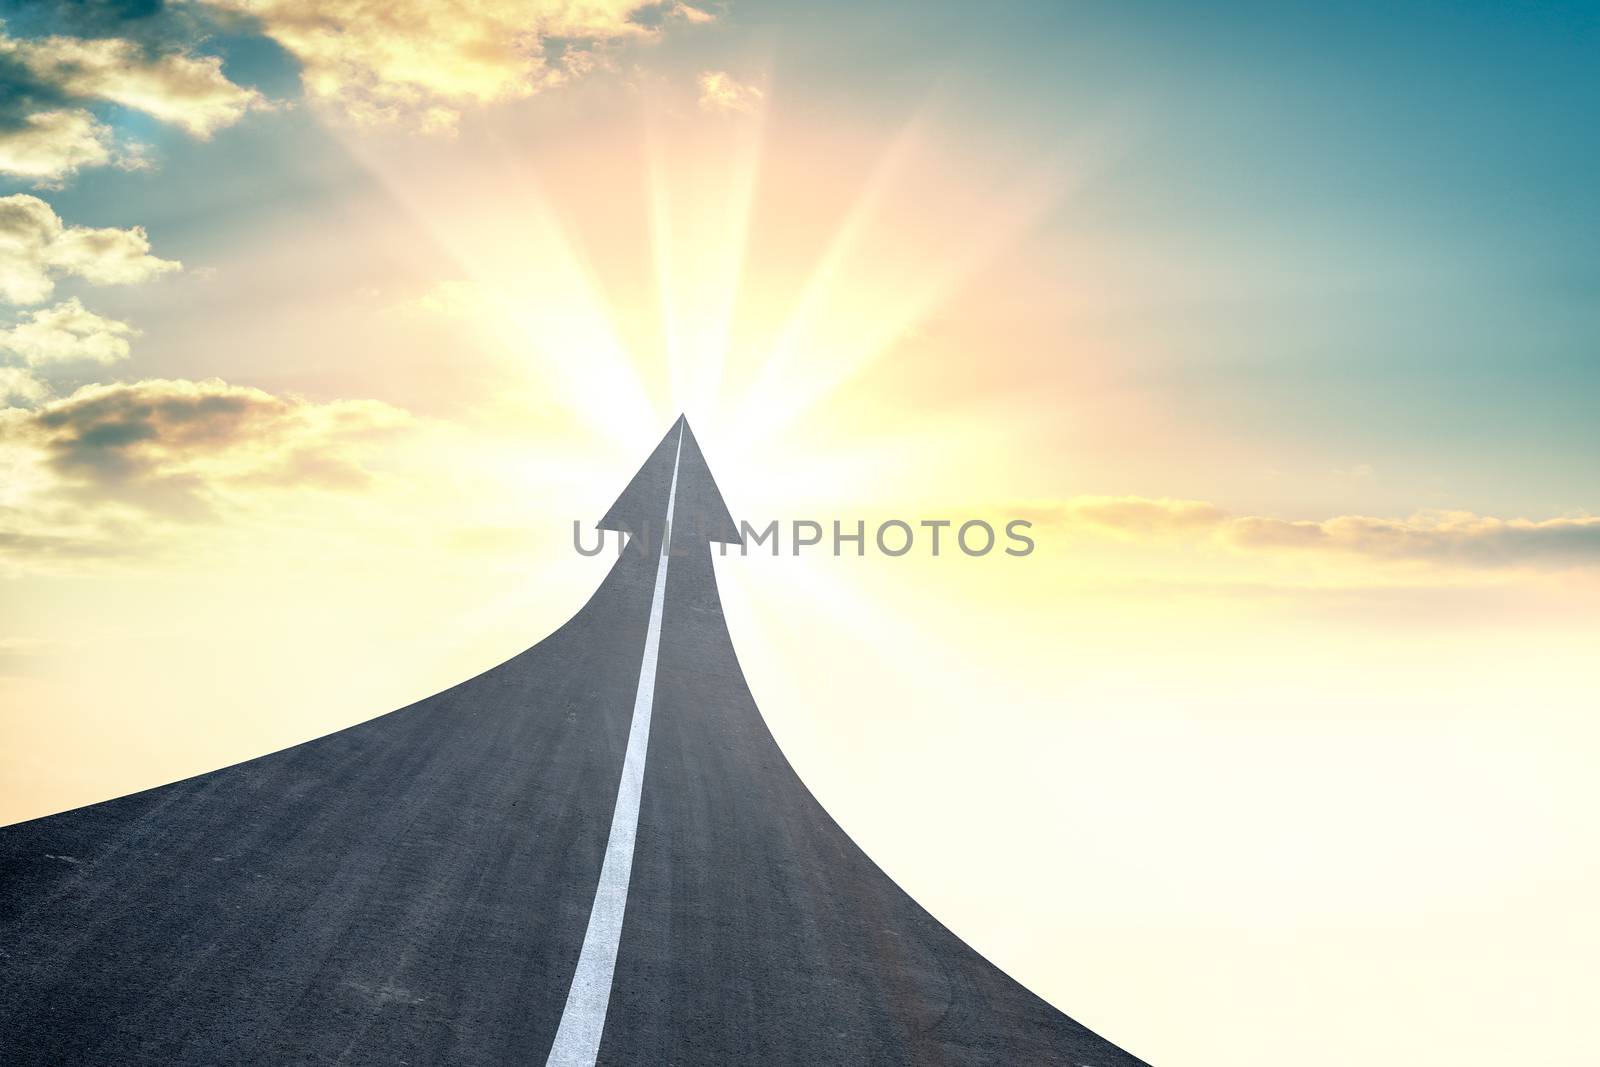 Highway road going up as an arrow. Sunset or sunrise in the background